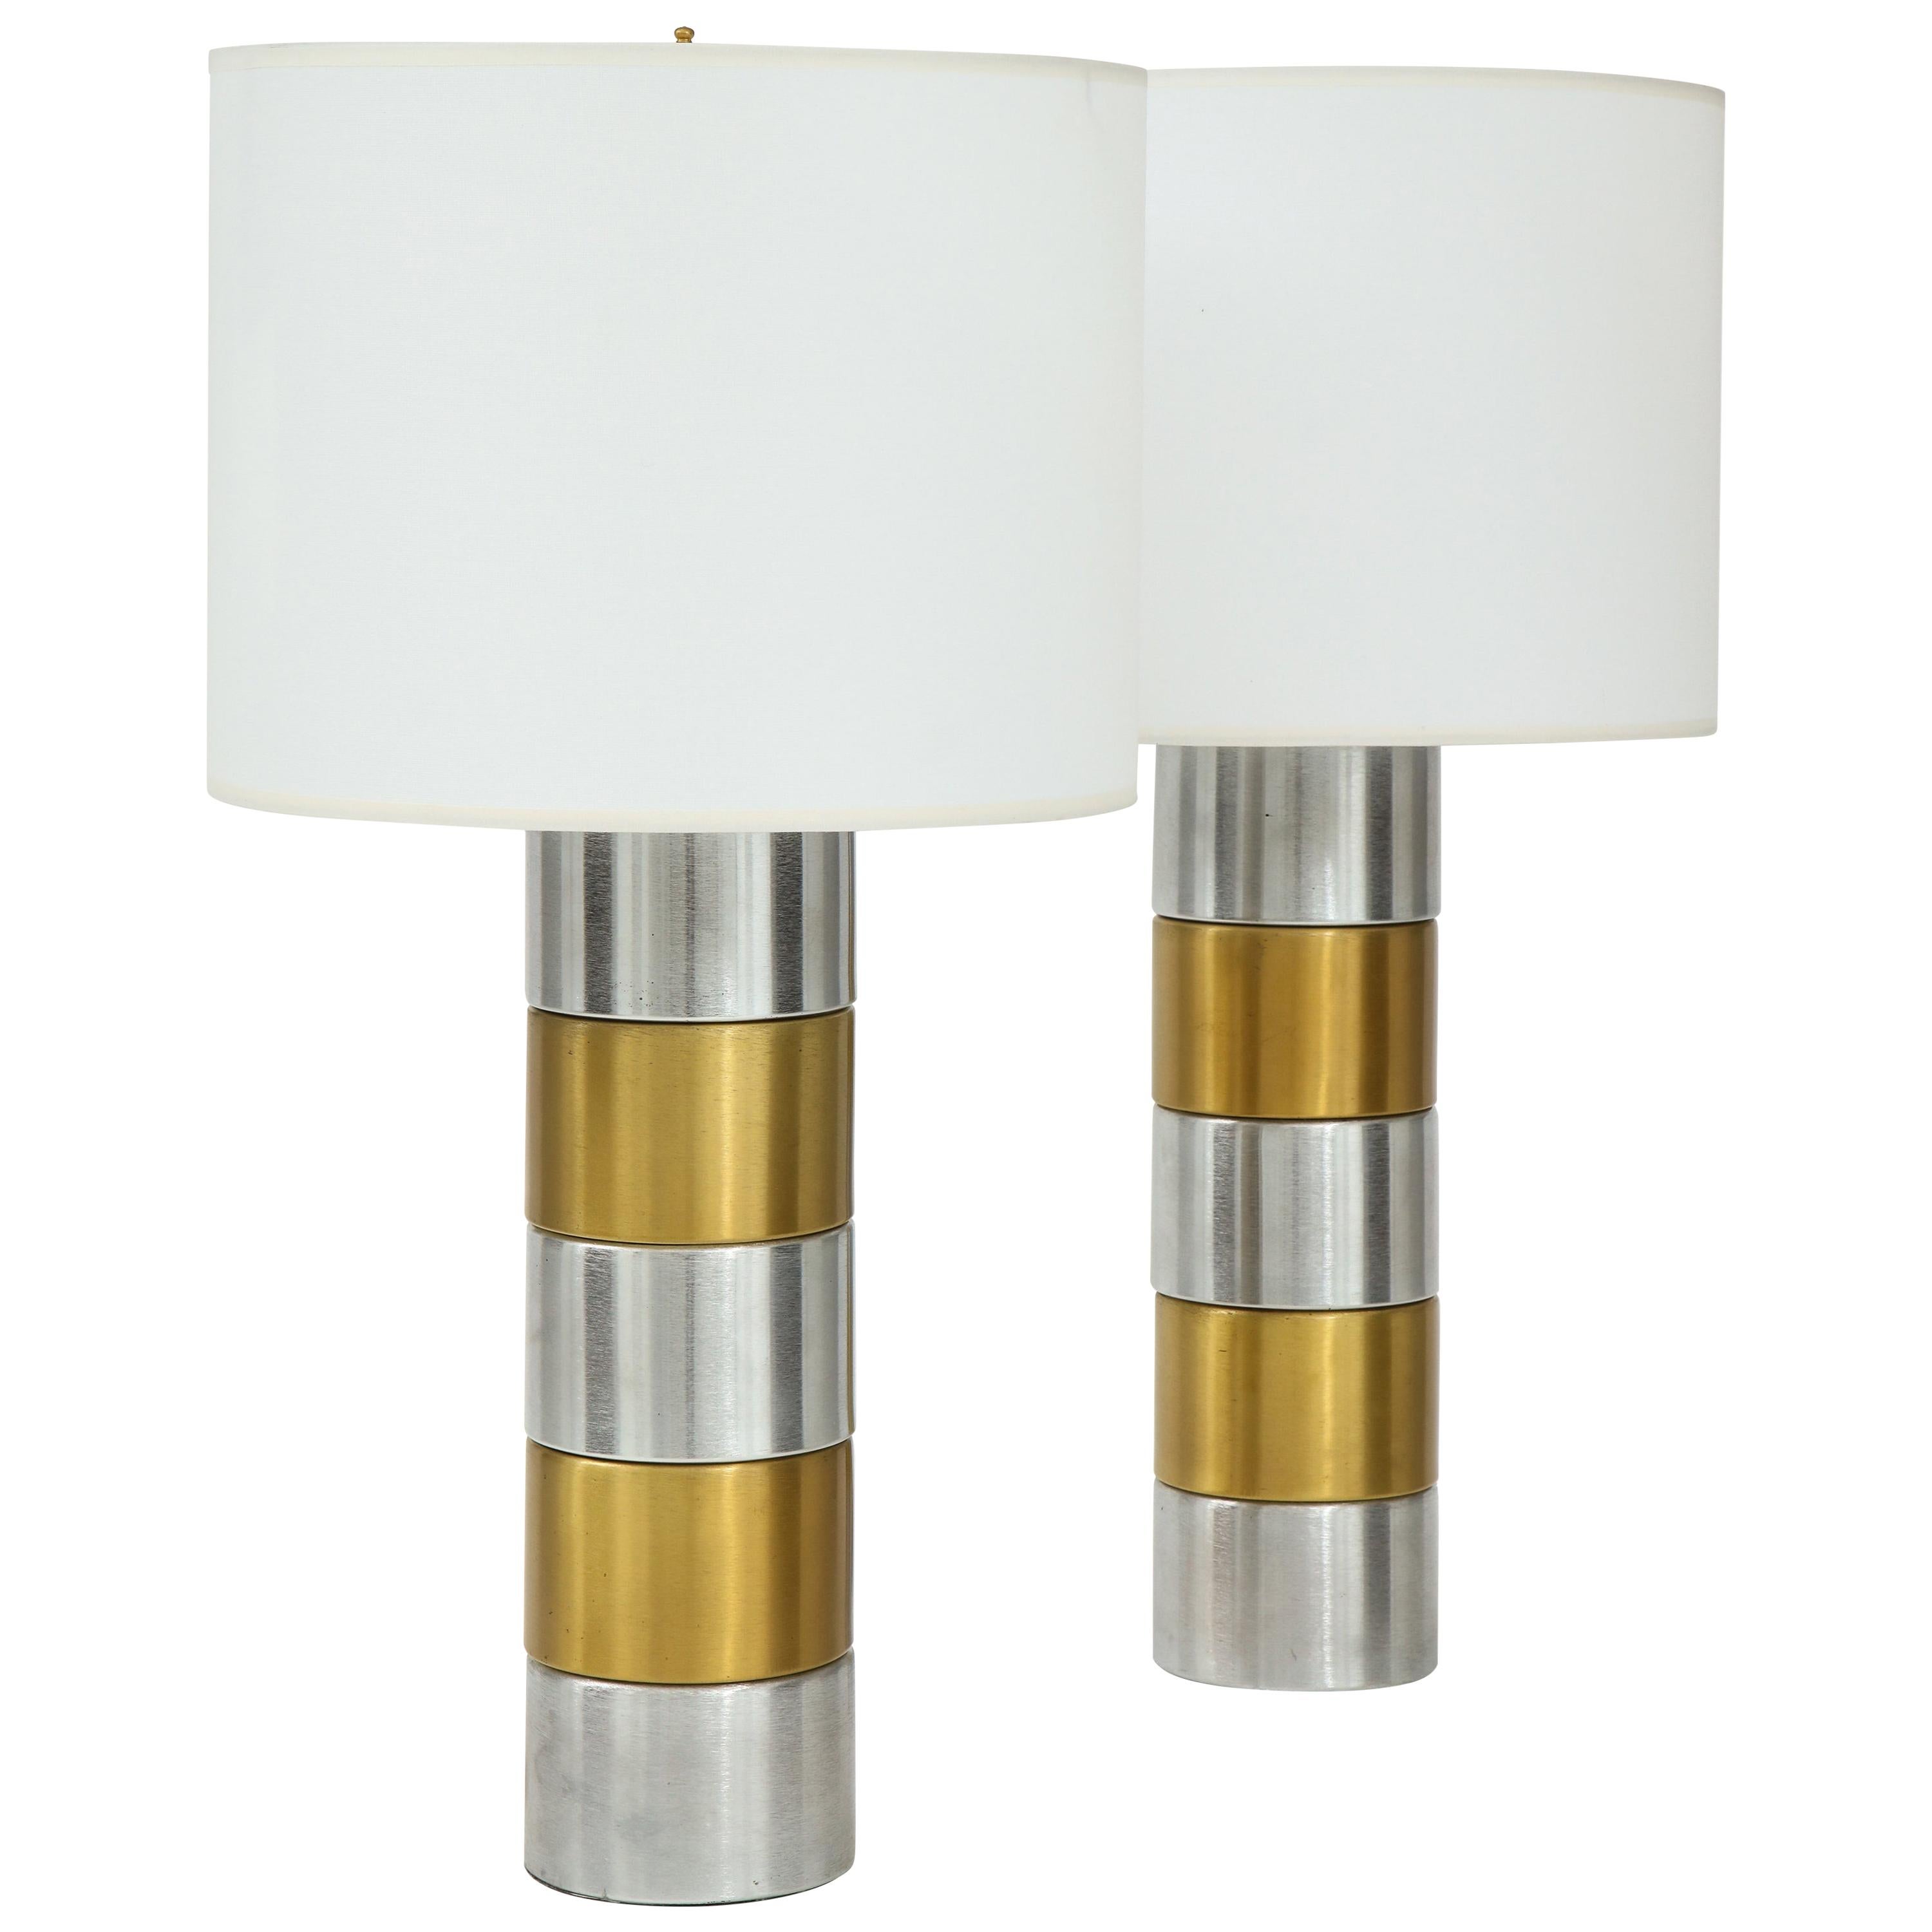 Pair of Brushed Steel and Brass Lamps